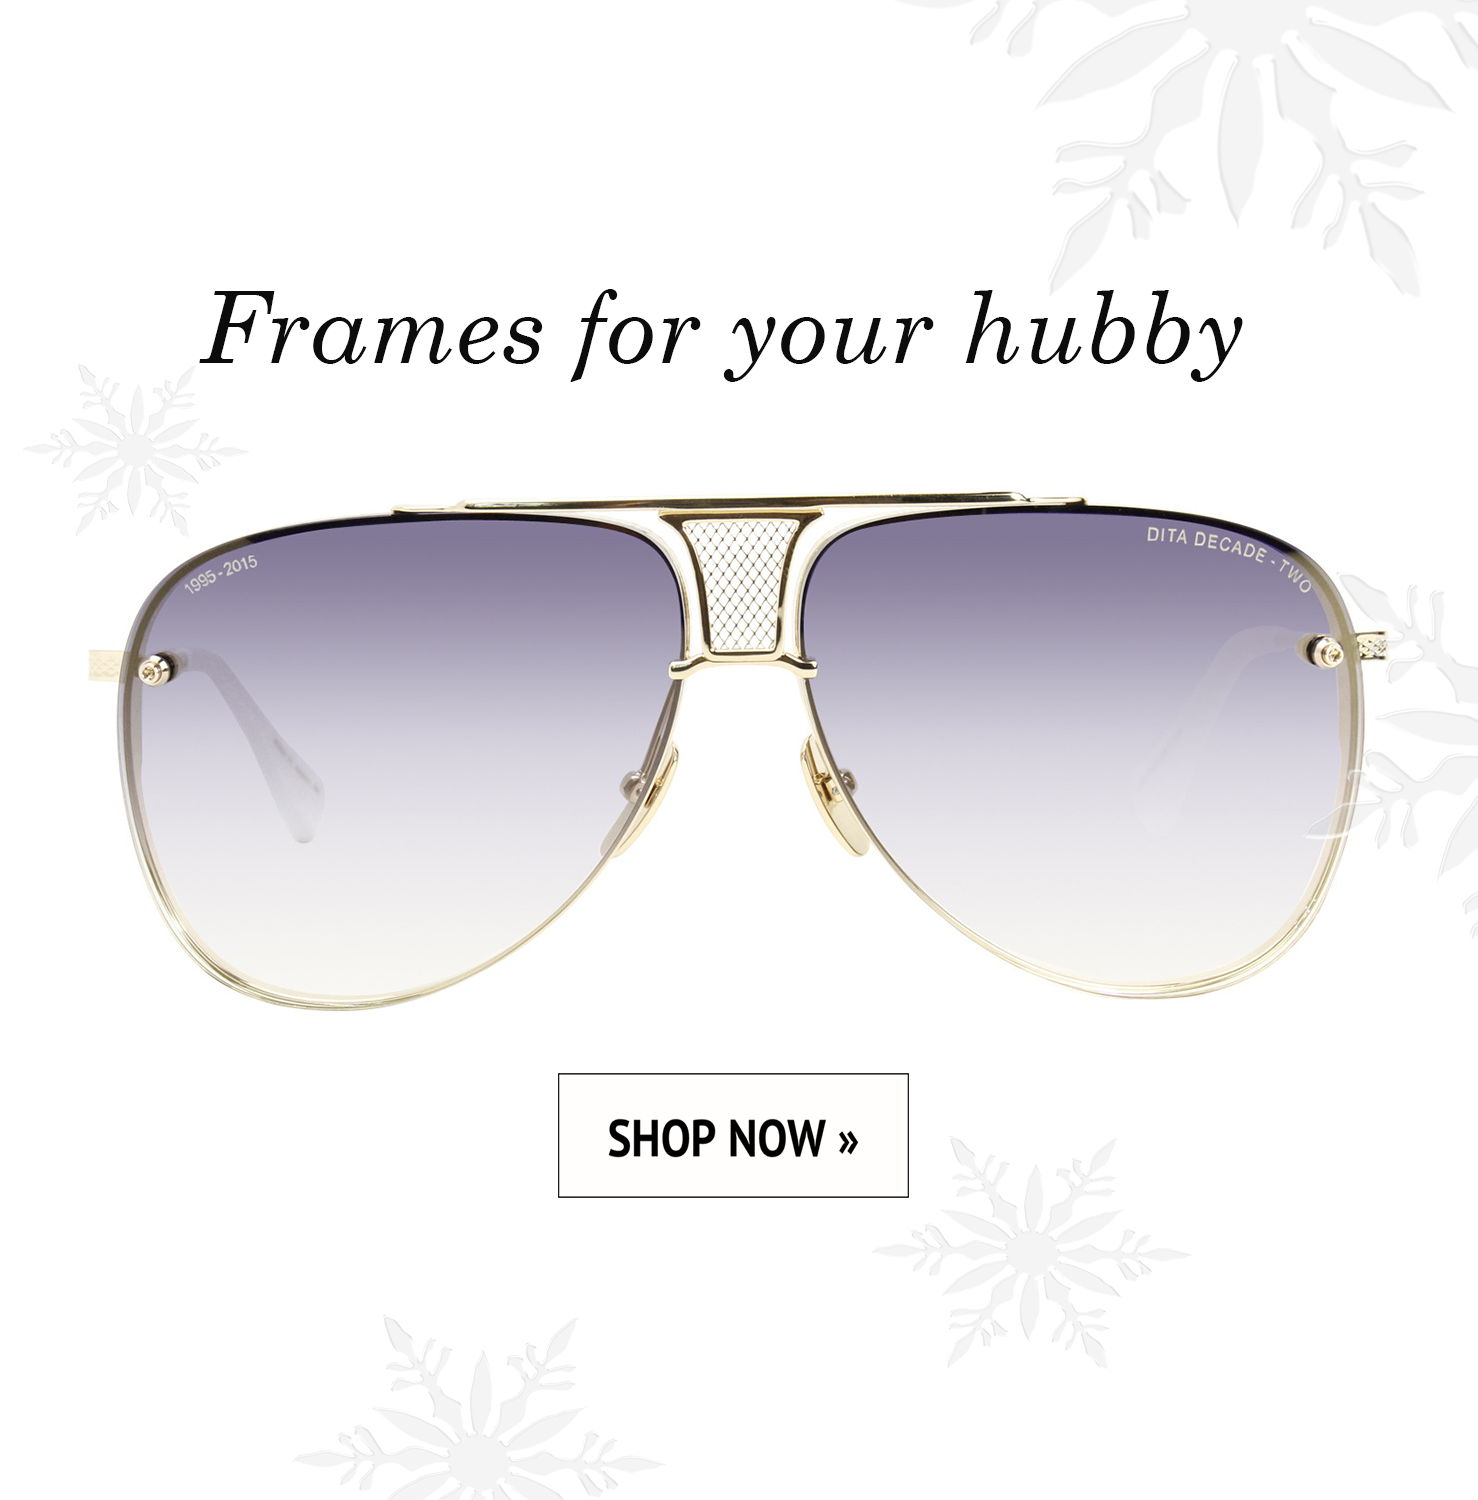 Frames for your hubby